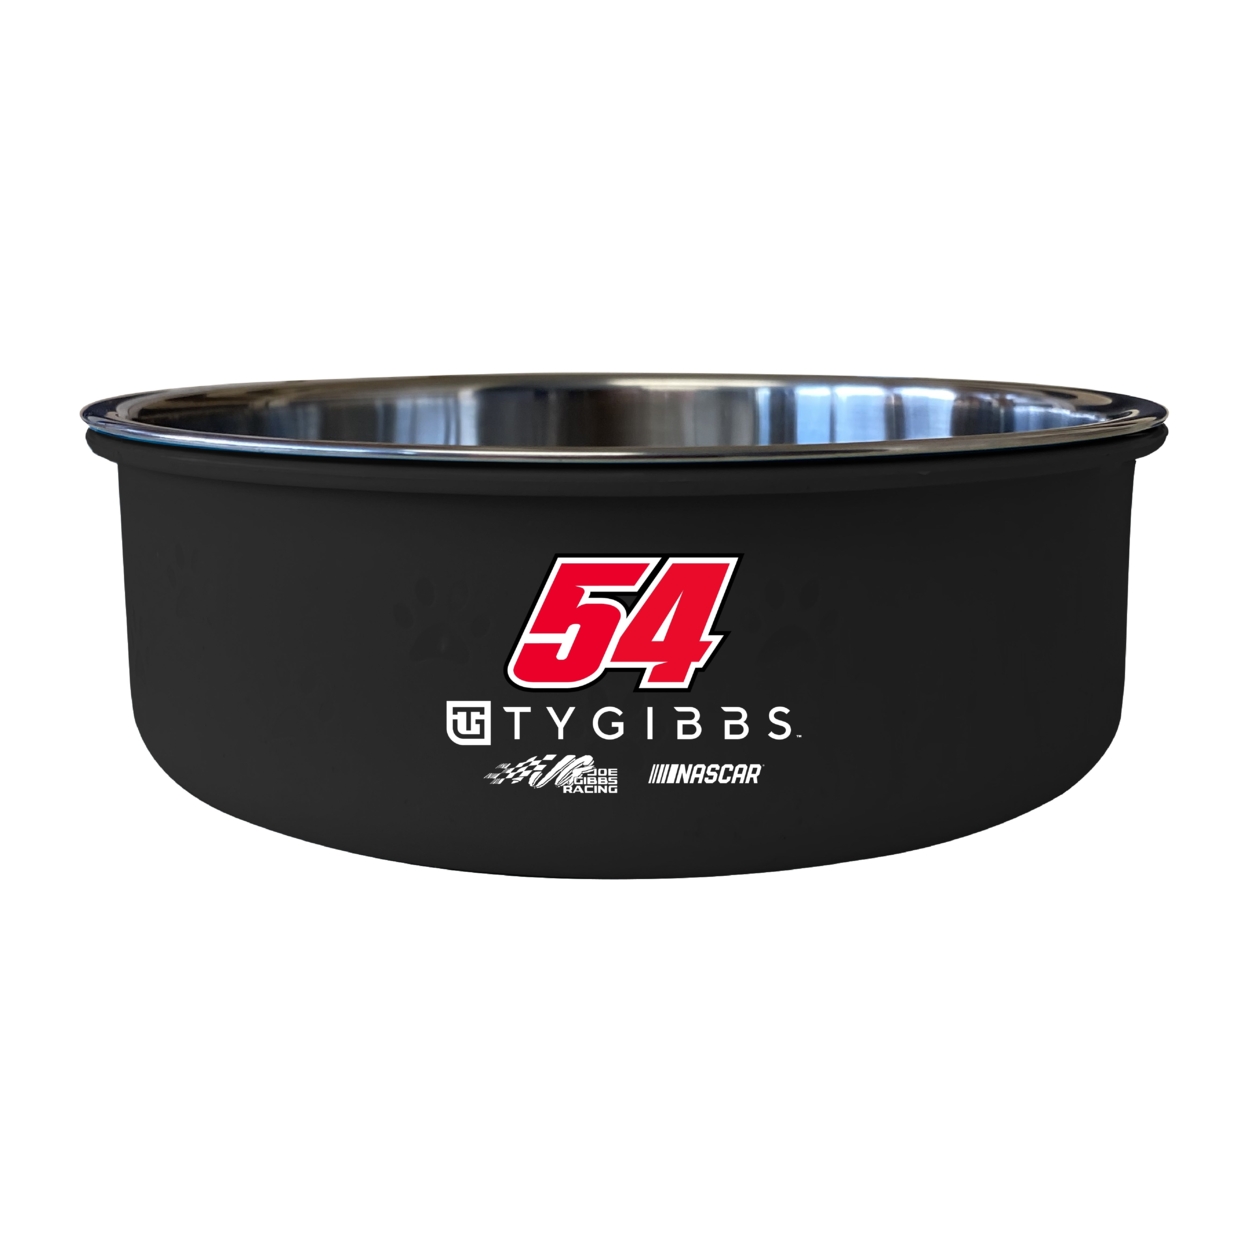 #54 Ty Gibbs Officially Licensed 5x2.25 Pet Bowl